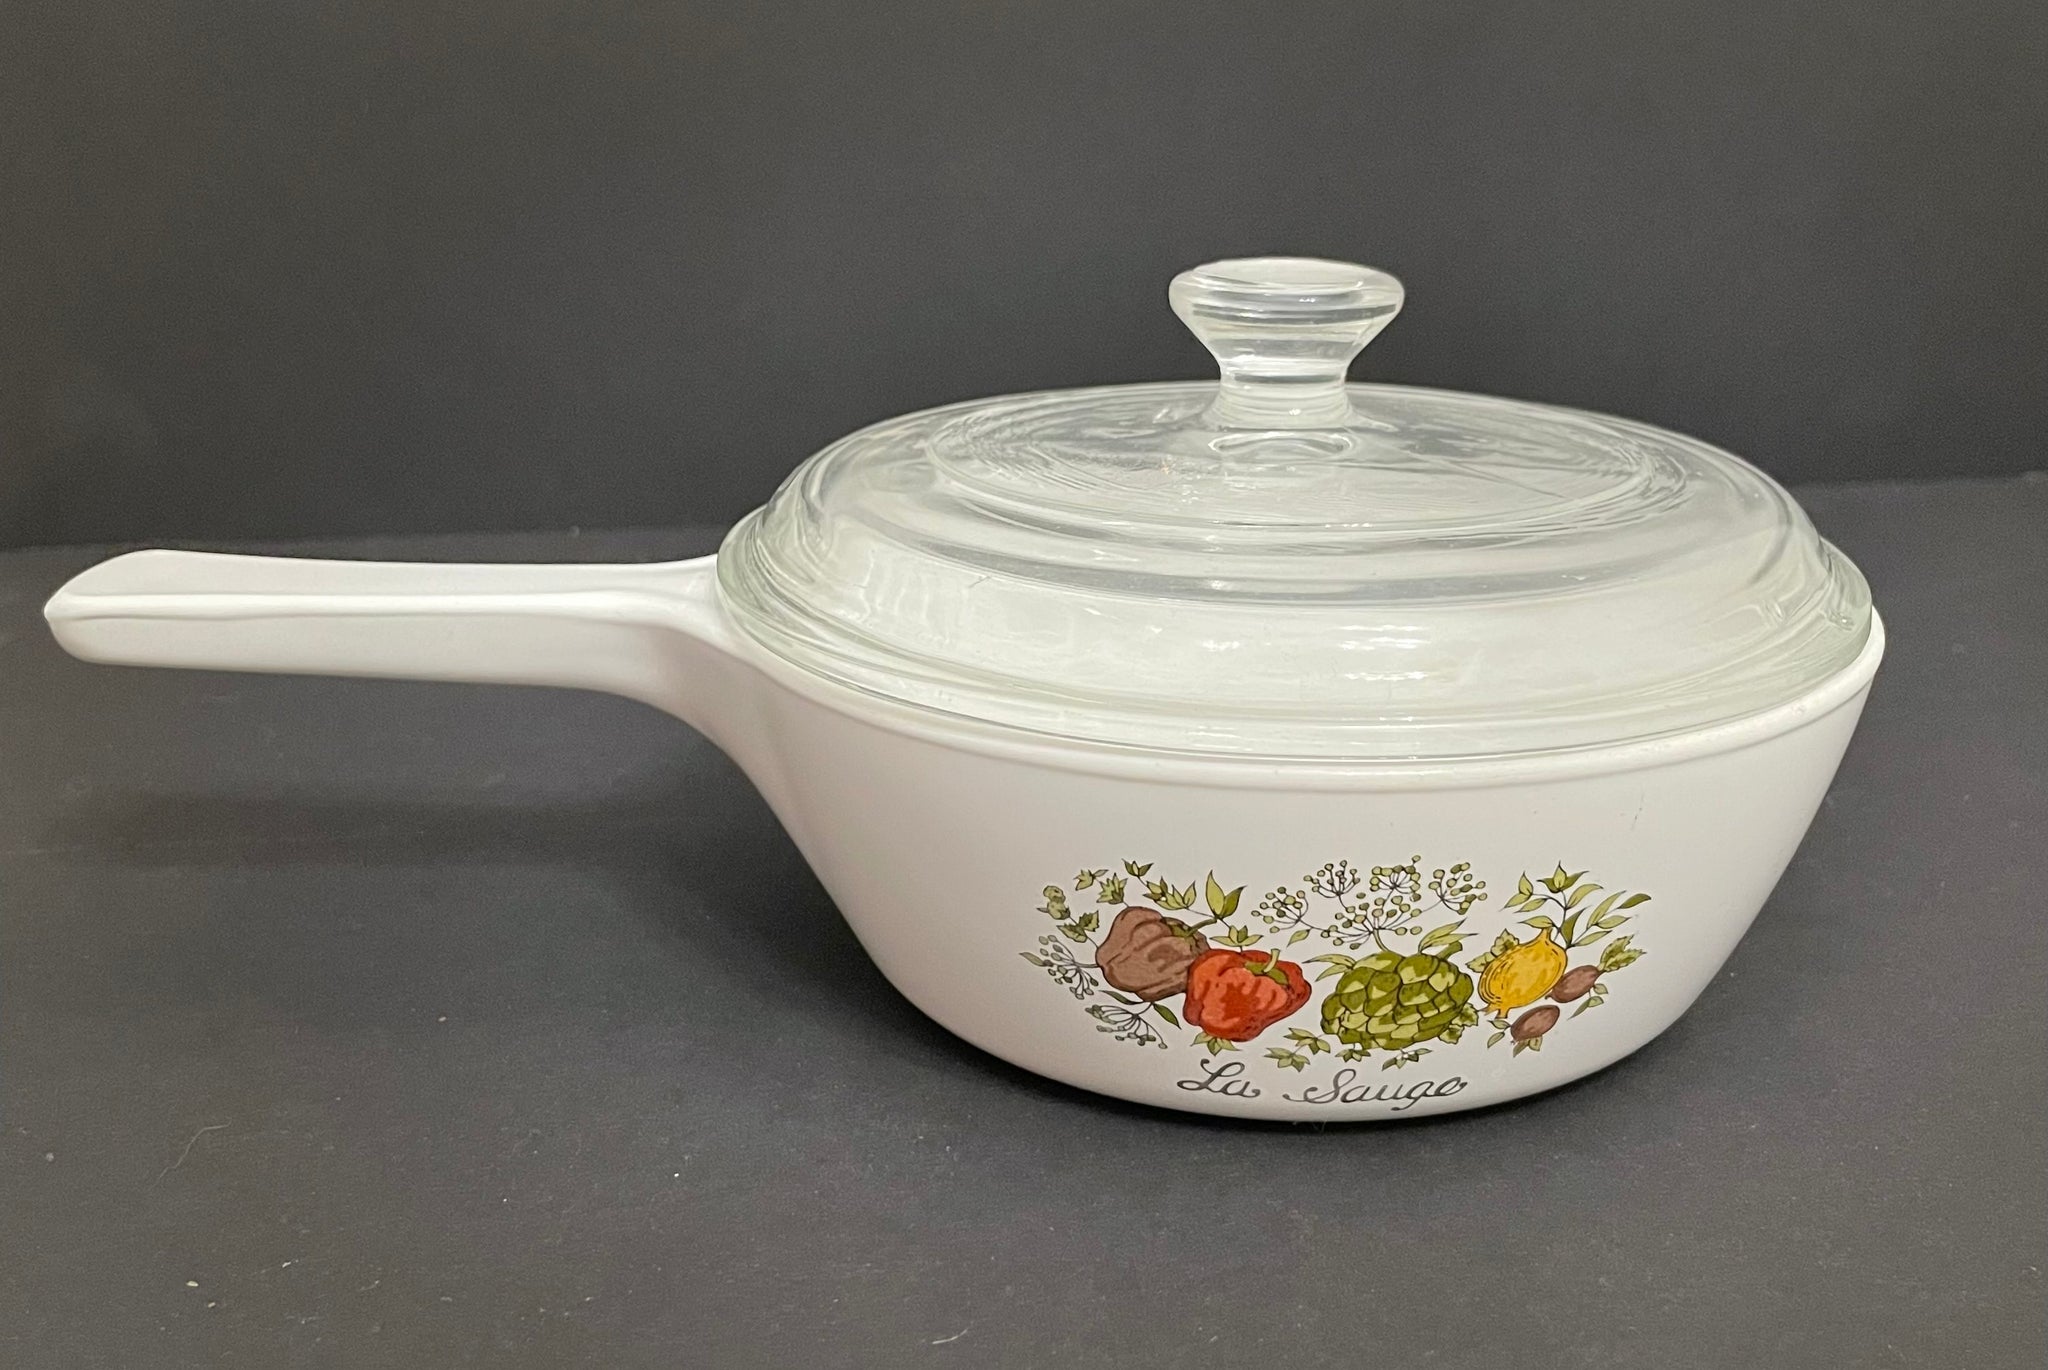 Corning Ware Range Toppers Spice of Life N-1 1/2-B Cookware with Handle &  Lid